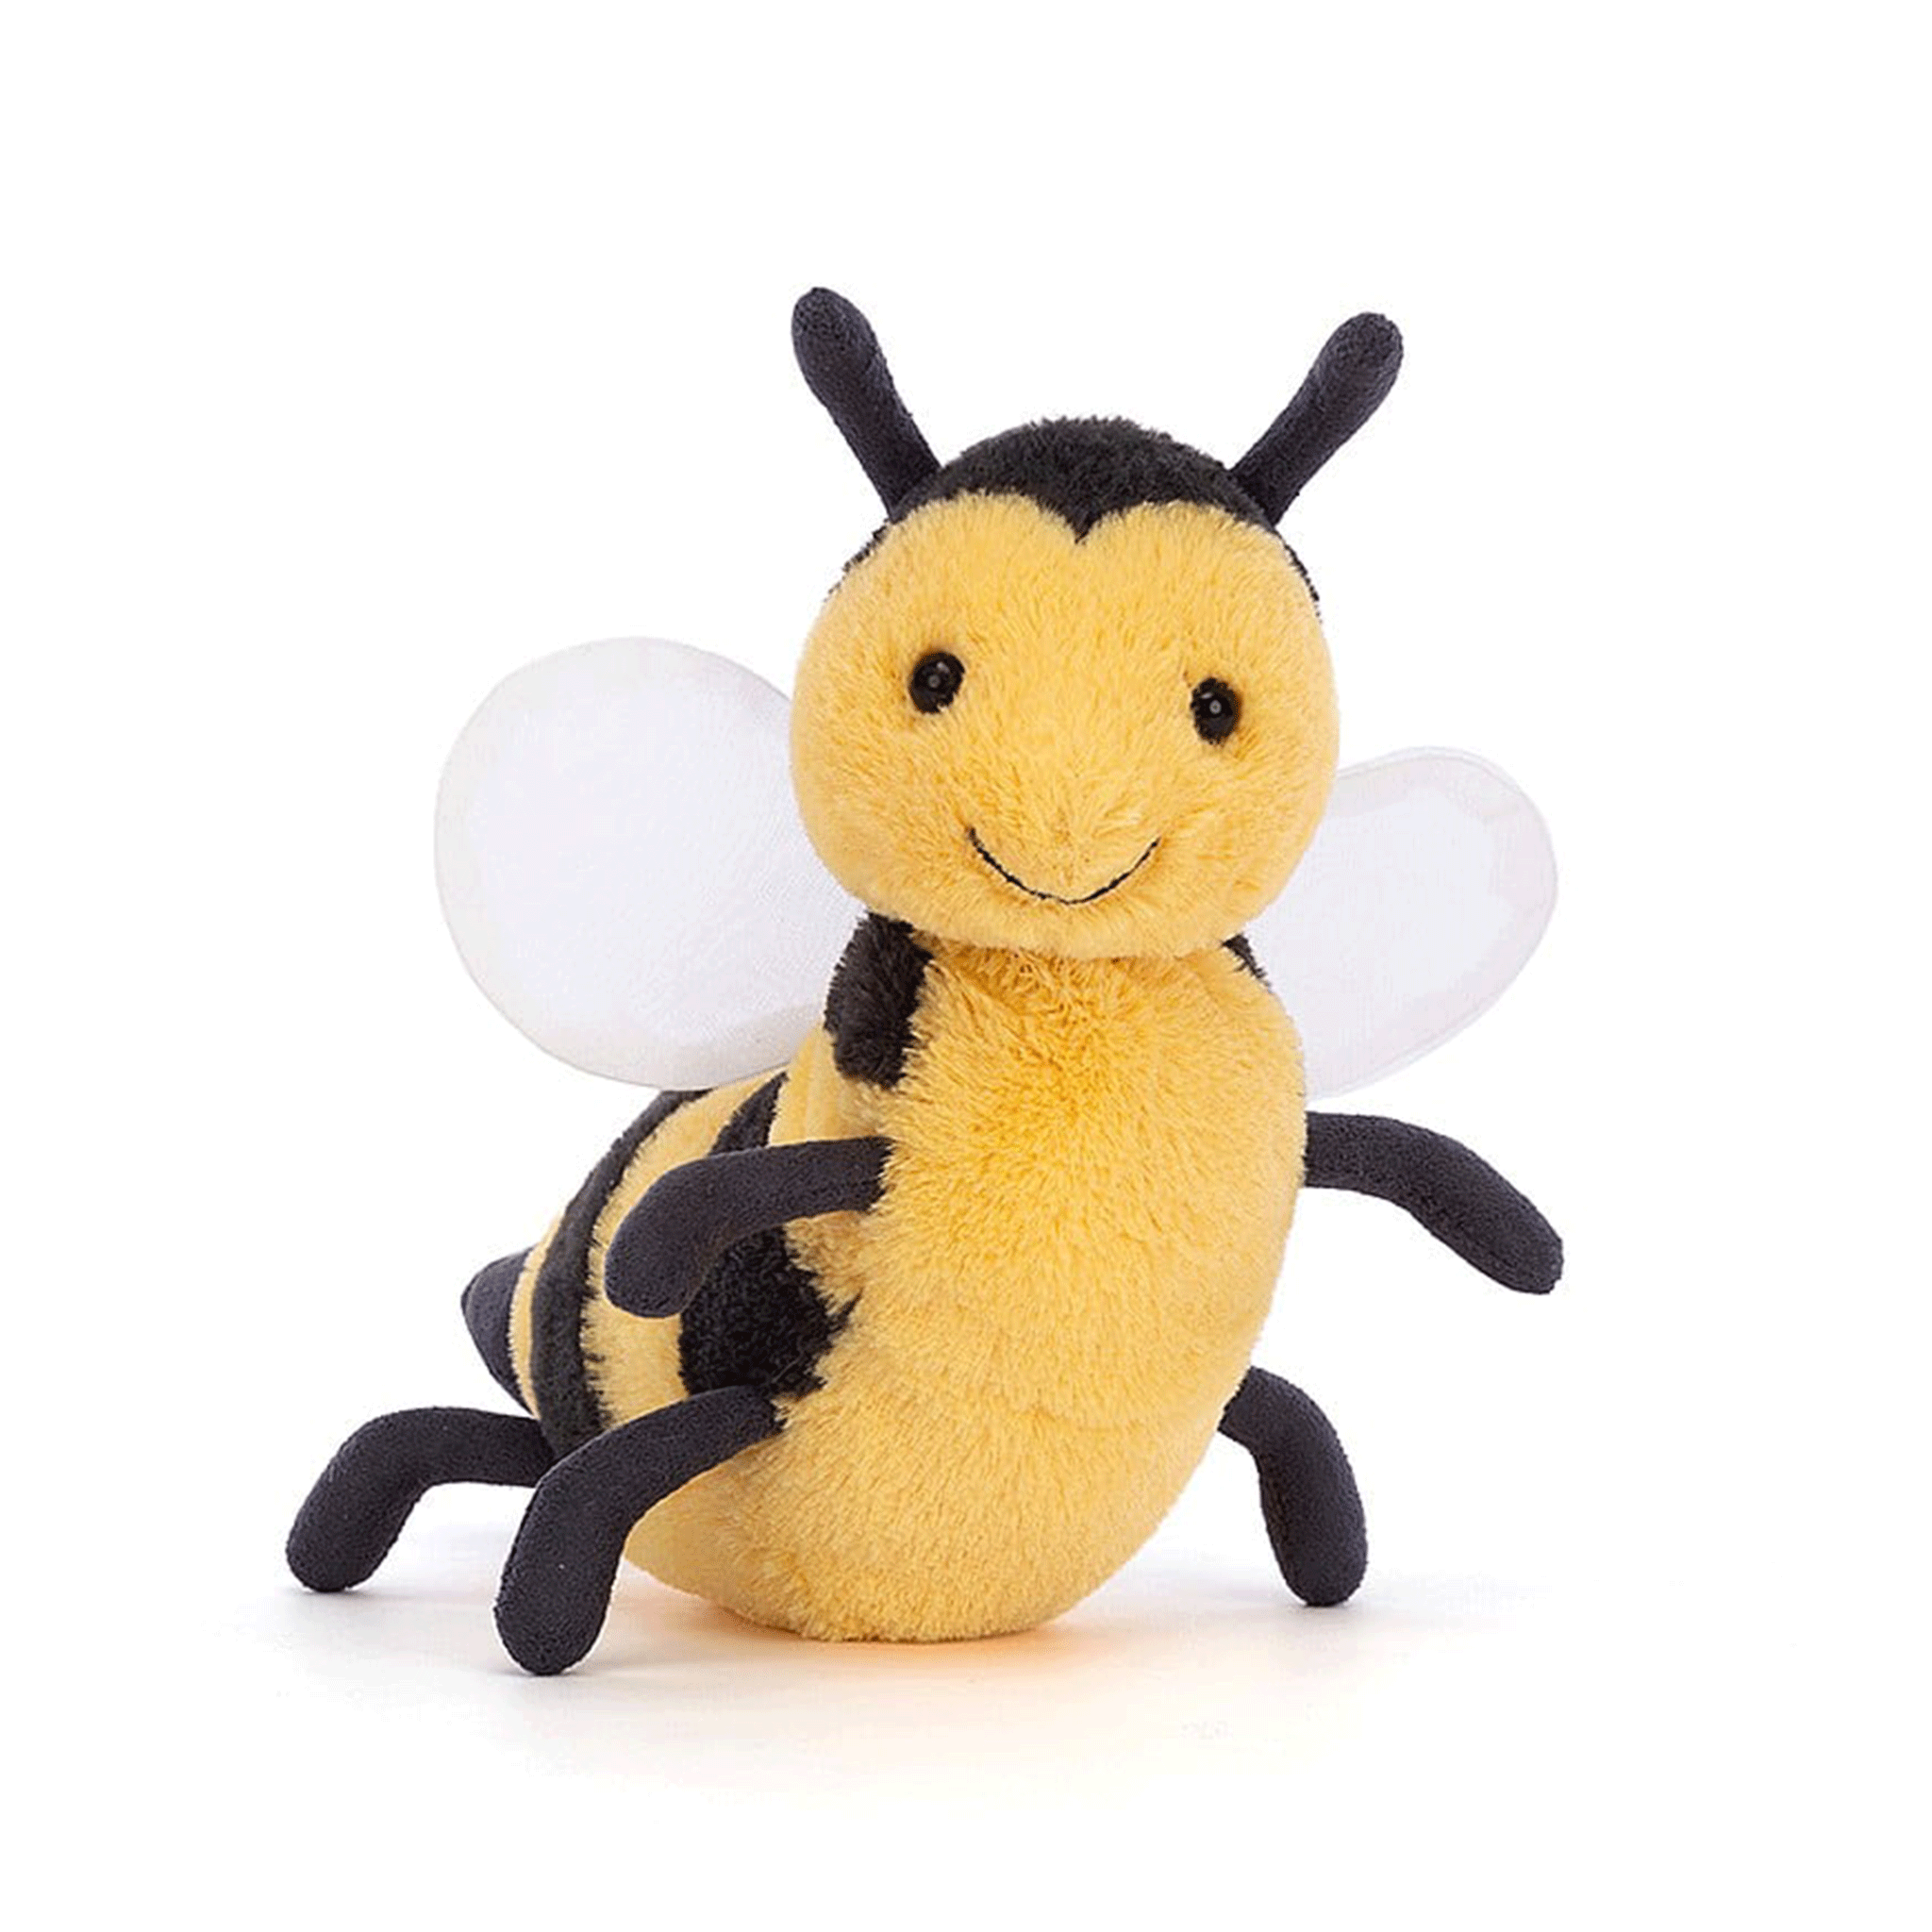 On a white background is a yellow and black bee stuffed animal with a smiling face,  a fuzzy body and round wings. 